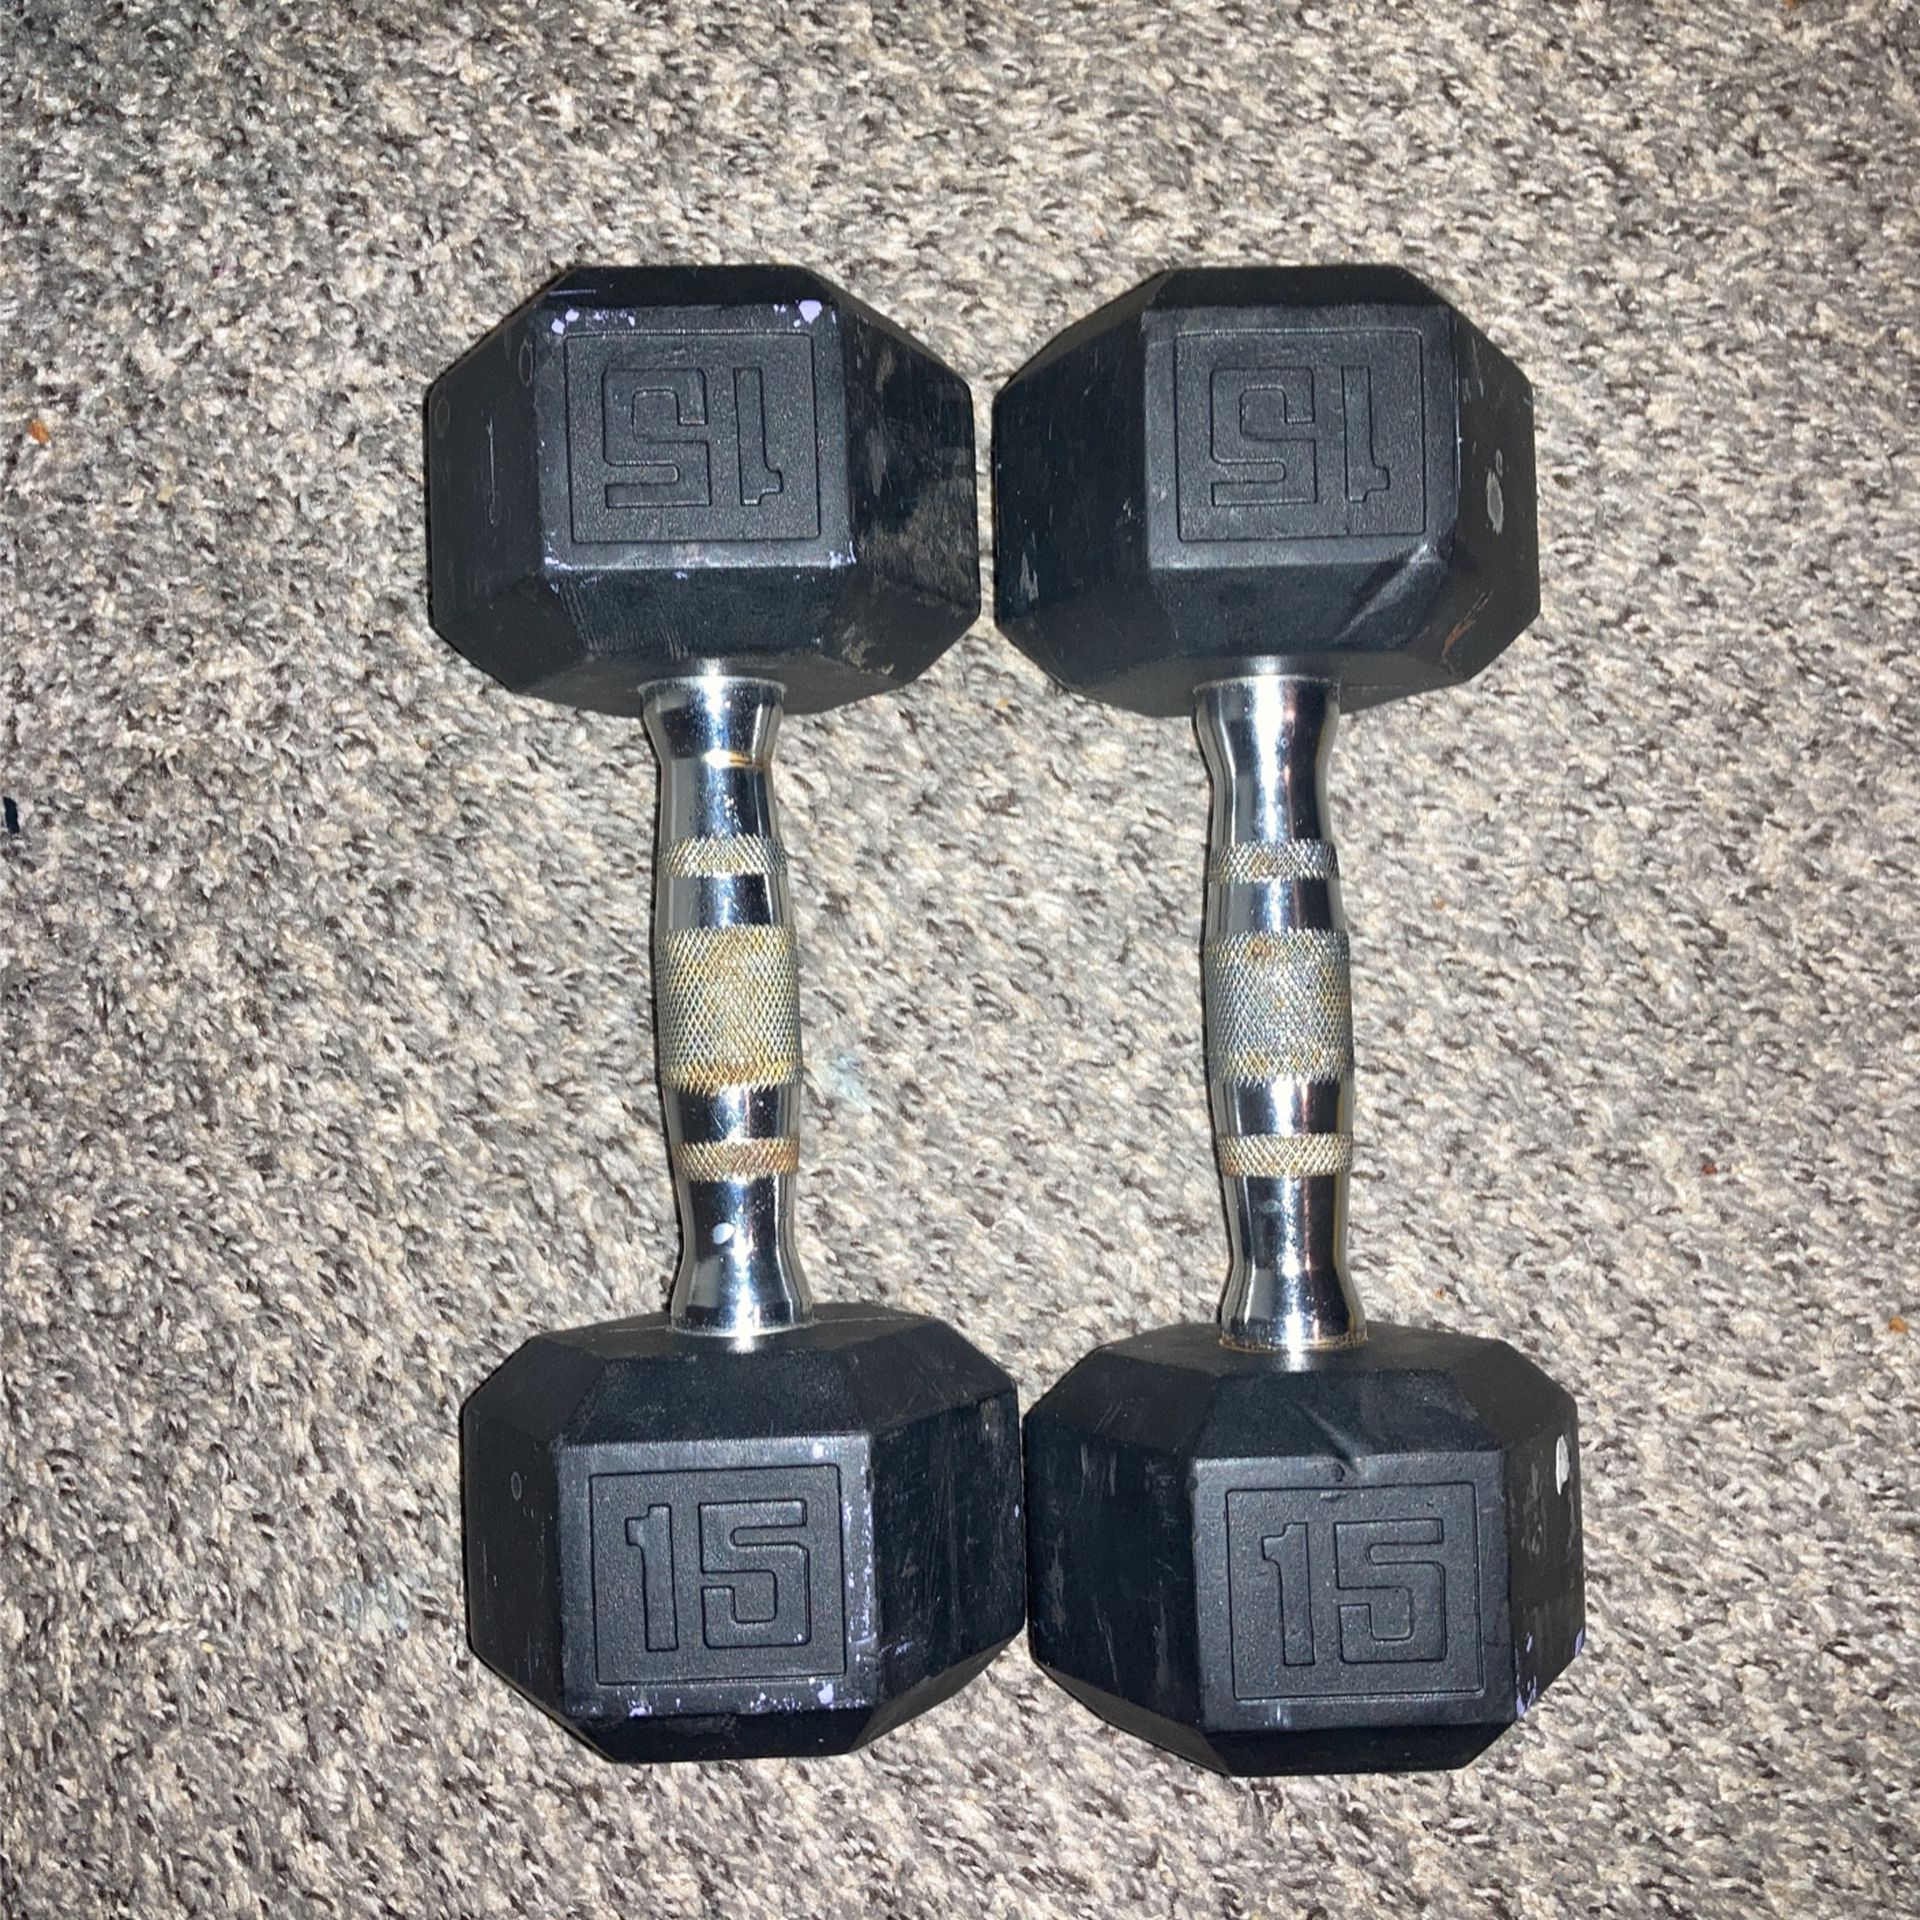 2 15lb Weights 